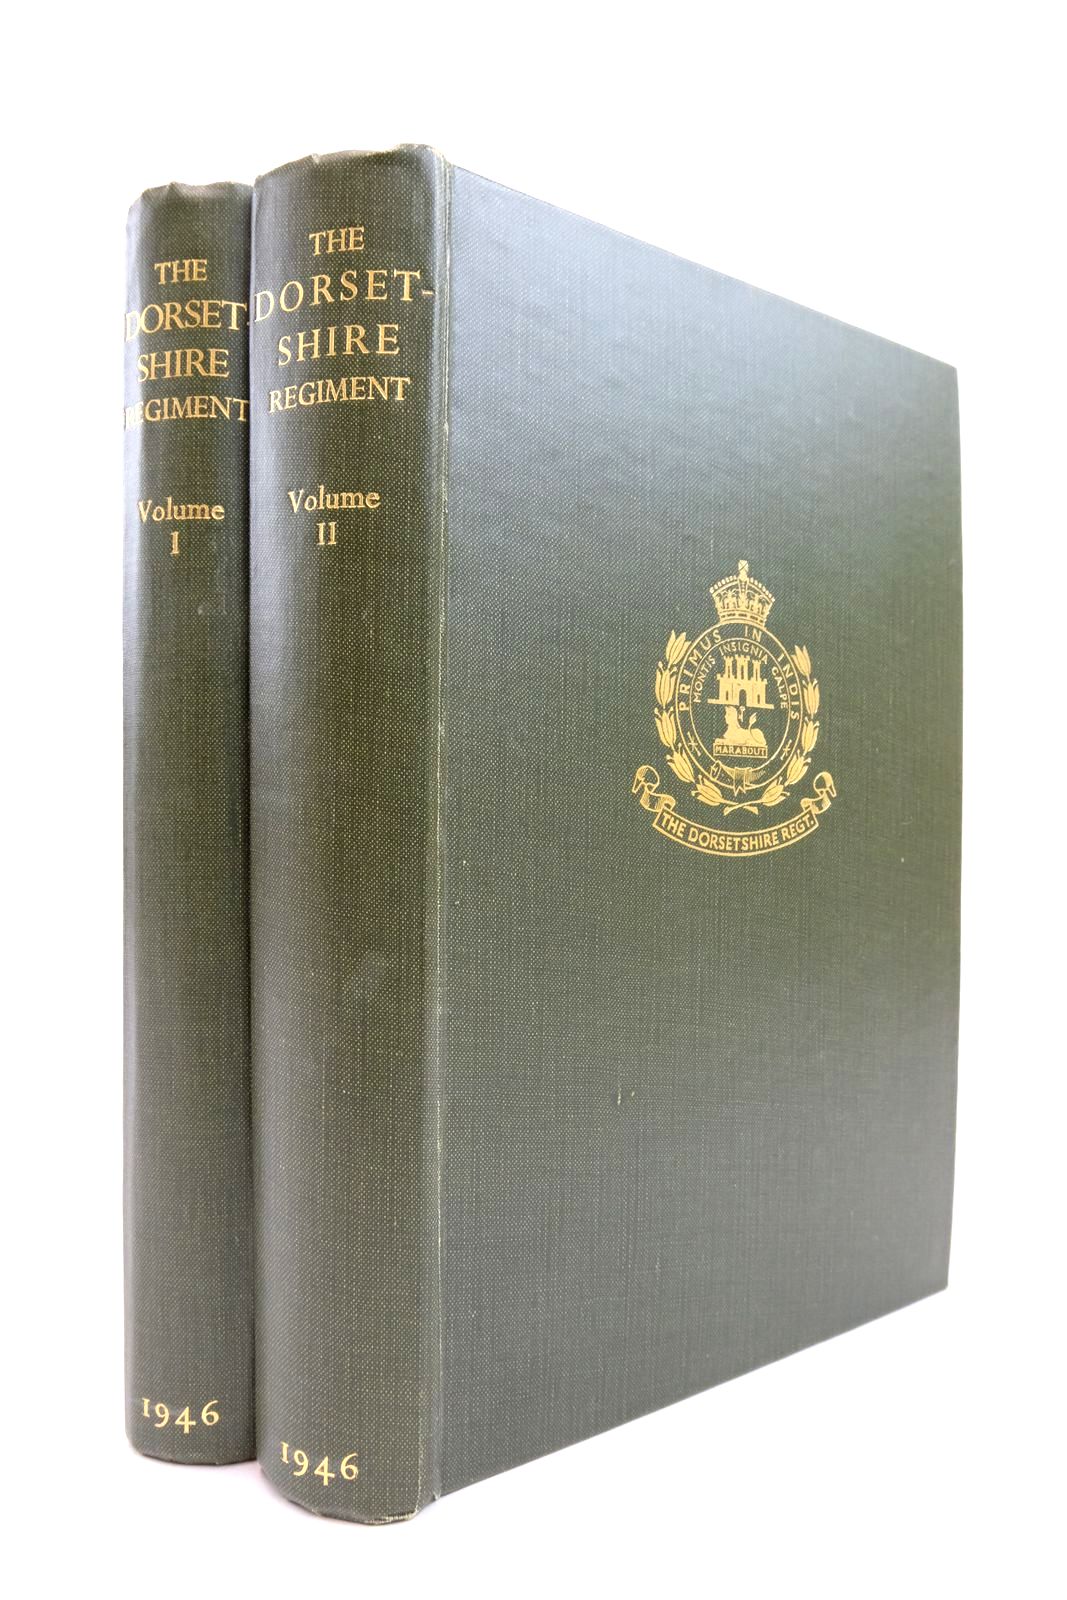 Photo of THE DORSETSHIRE REGIMENT (2 VOLUMES) written by Atkinson, C.T. published by Oxford (STOCK CODE: 2137322)  for sale by Stella & Rose's Books